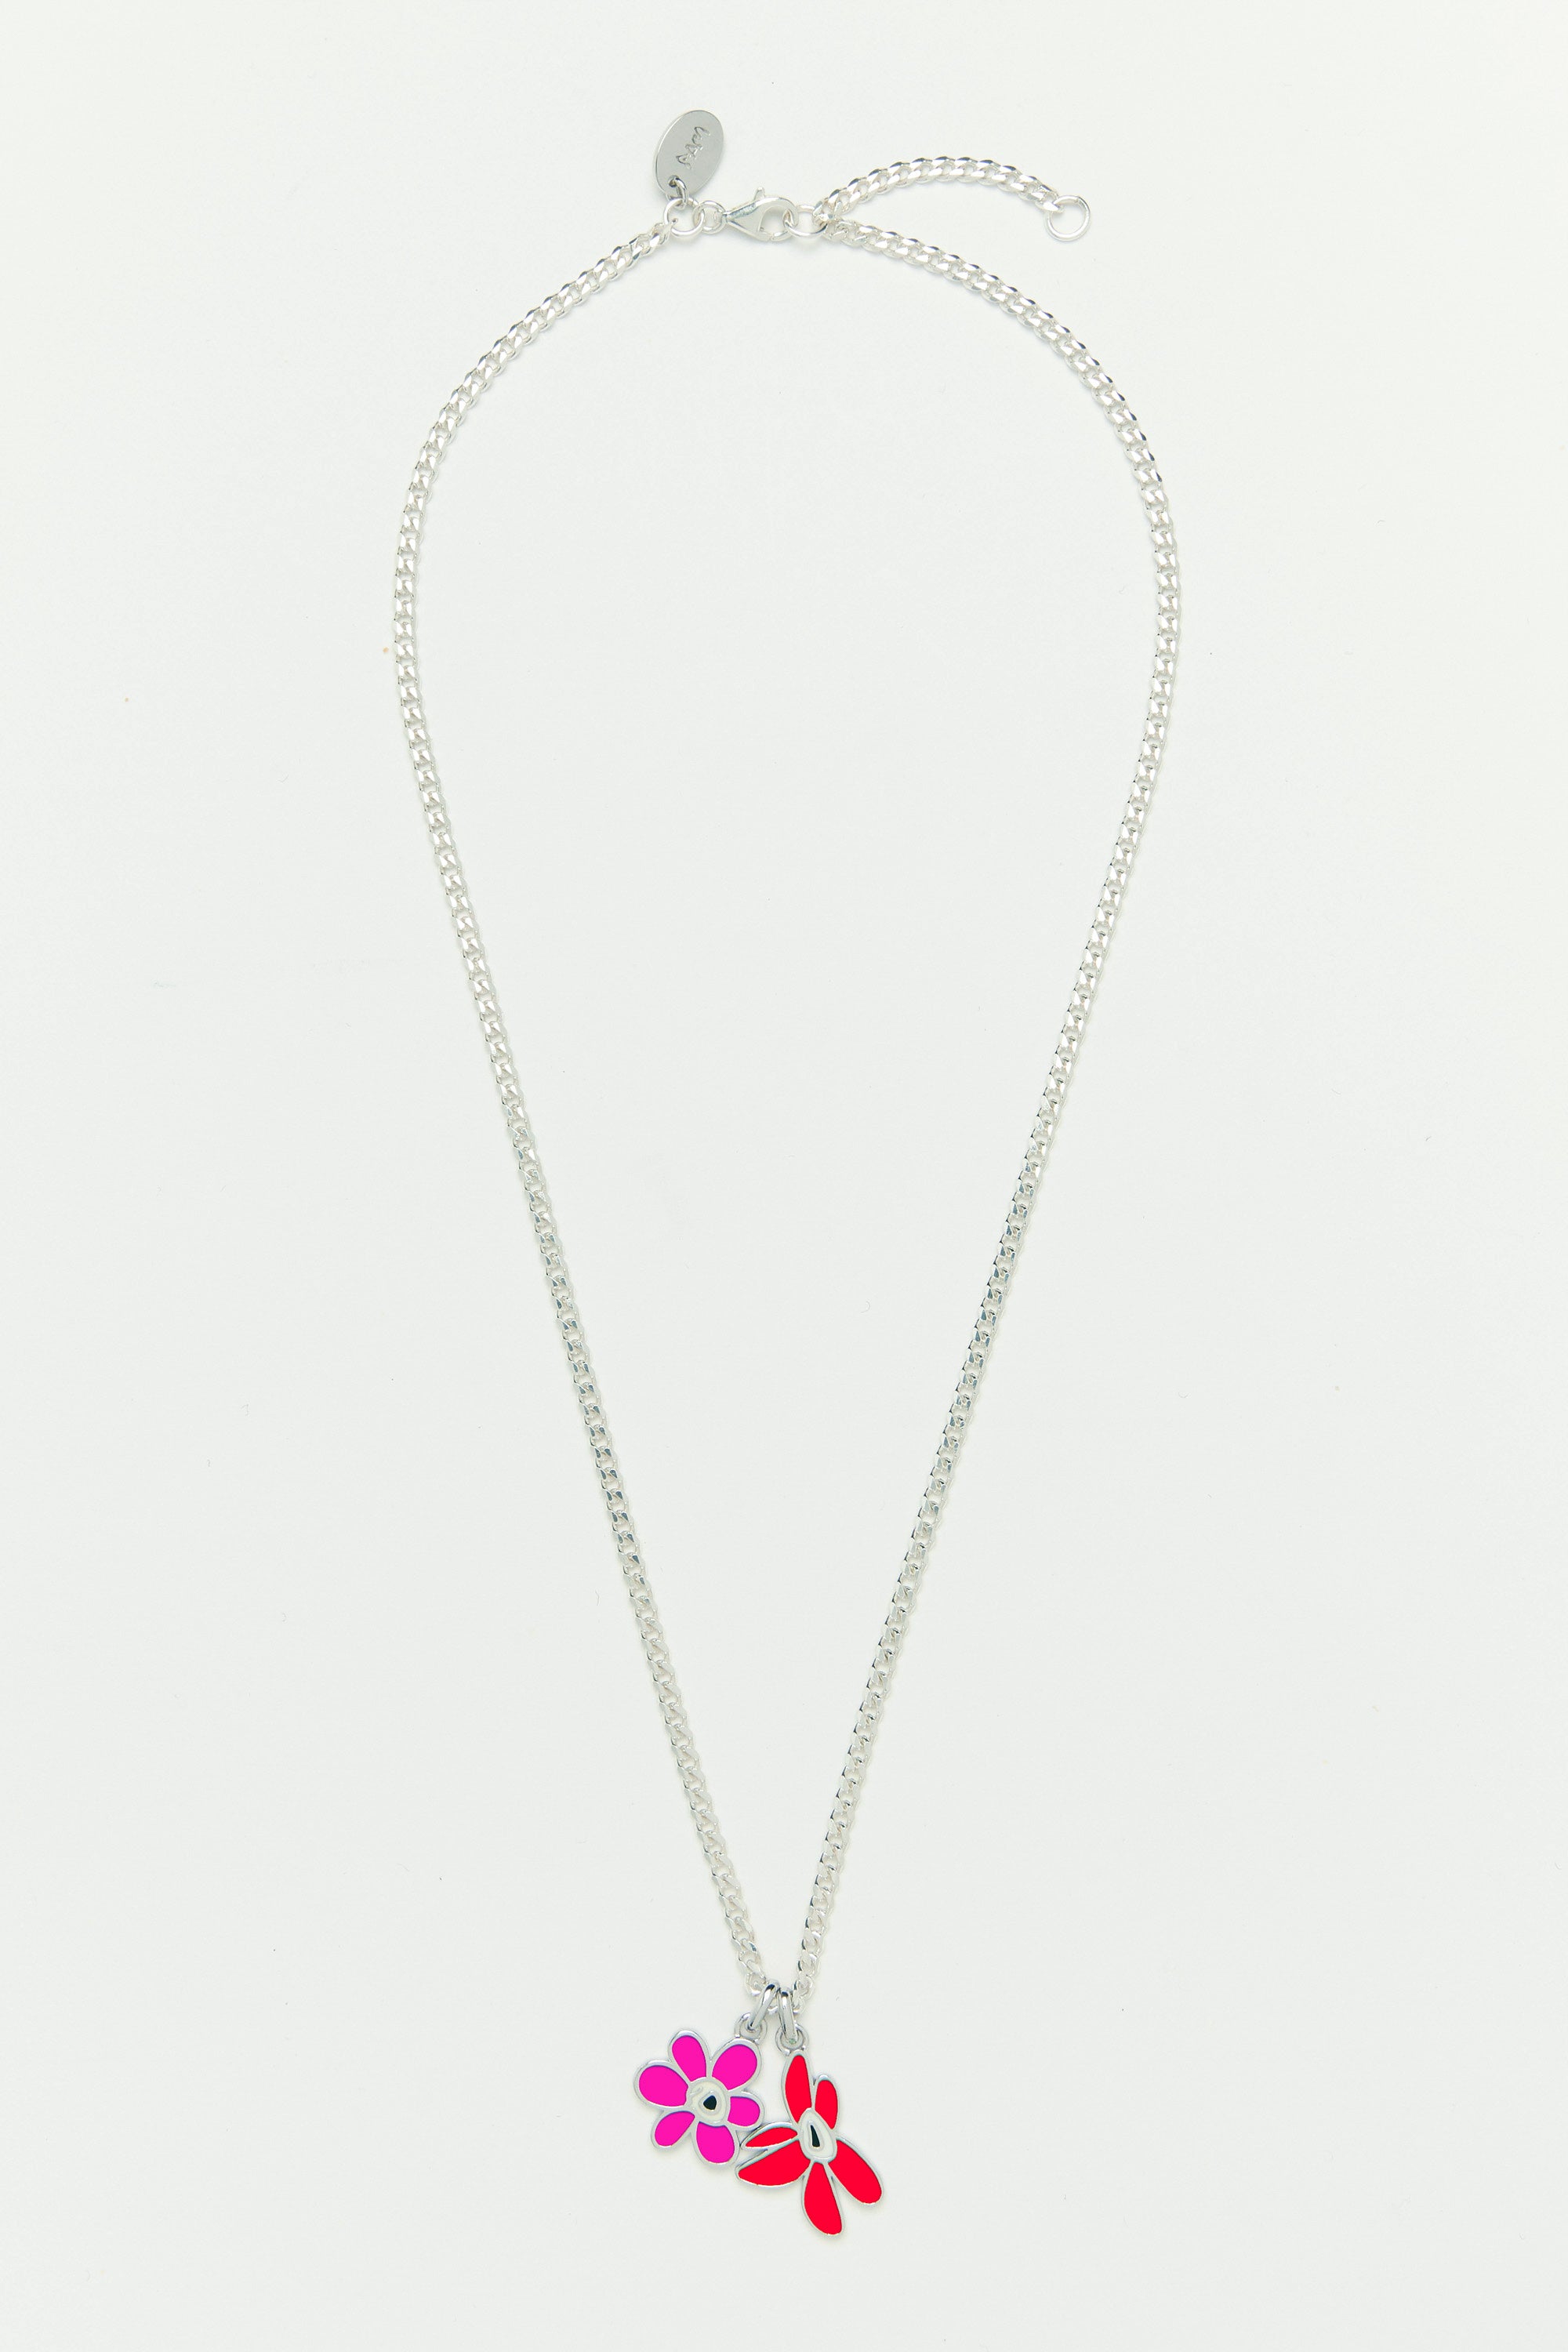 The DUAL GESTURE NECKLACE B  available online with global shipping, and in PAM Stores Melbourne and Sydney.